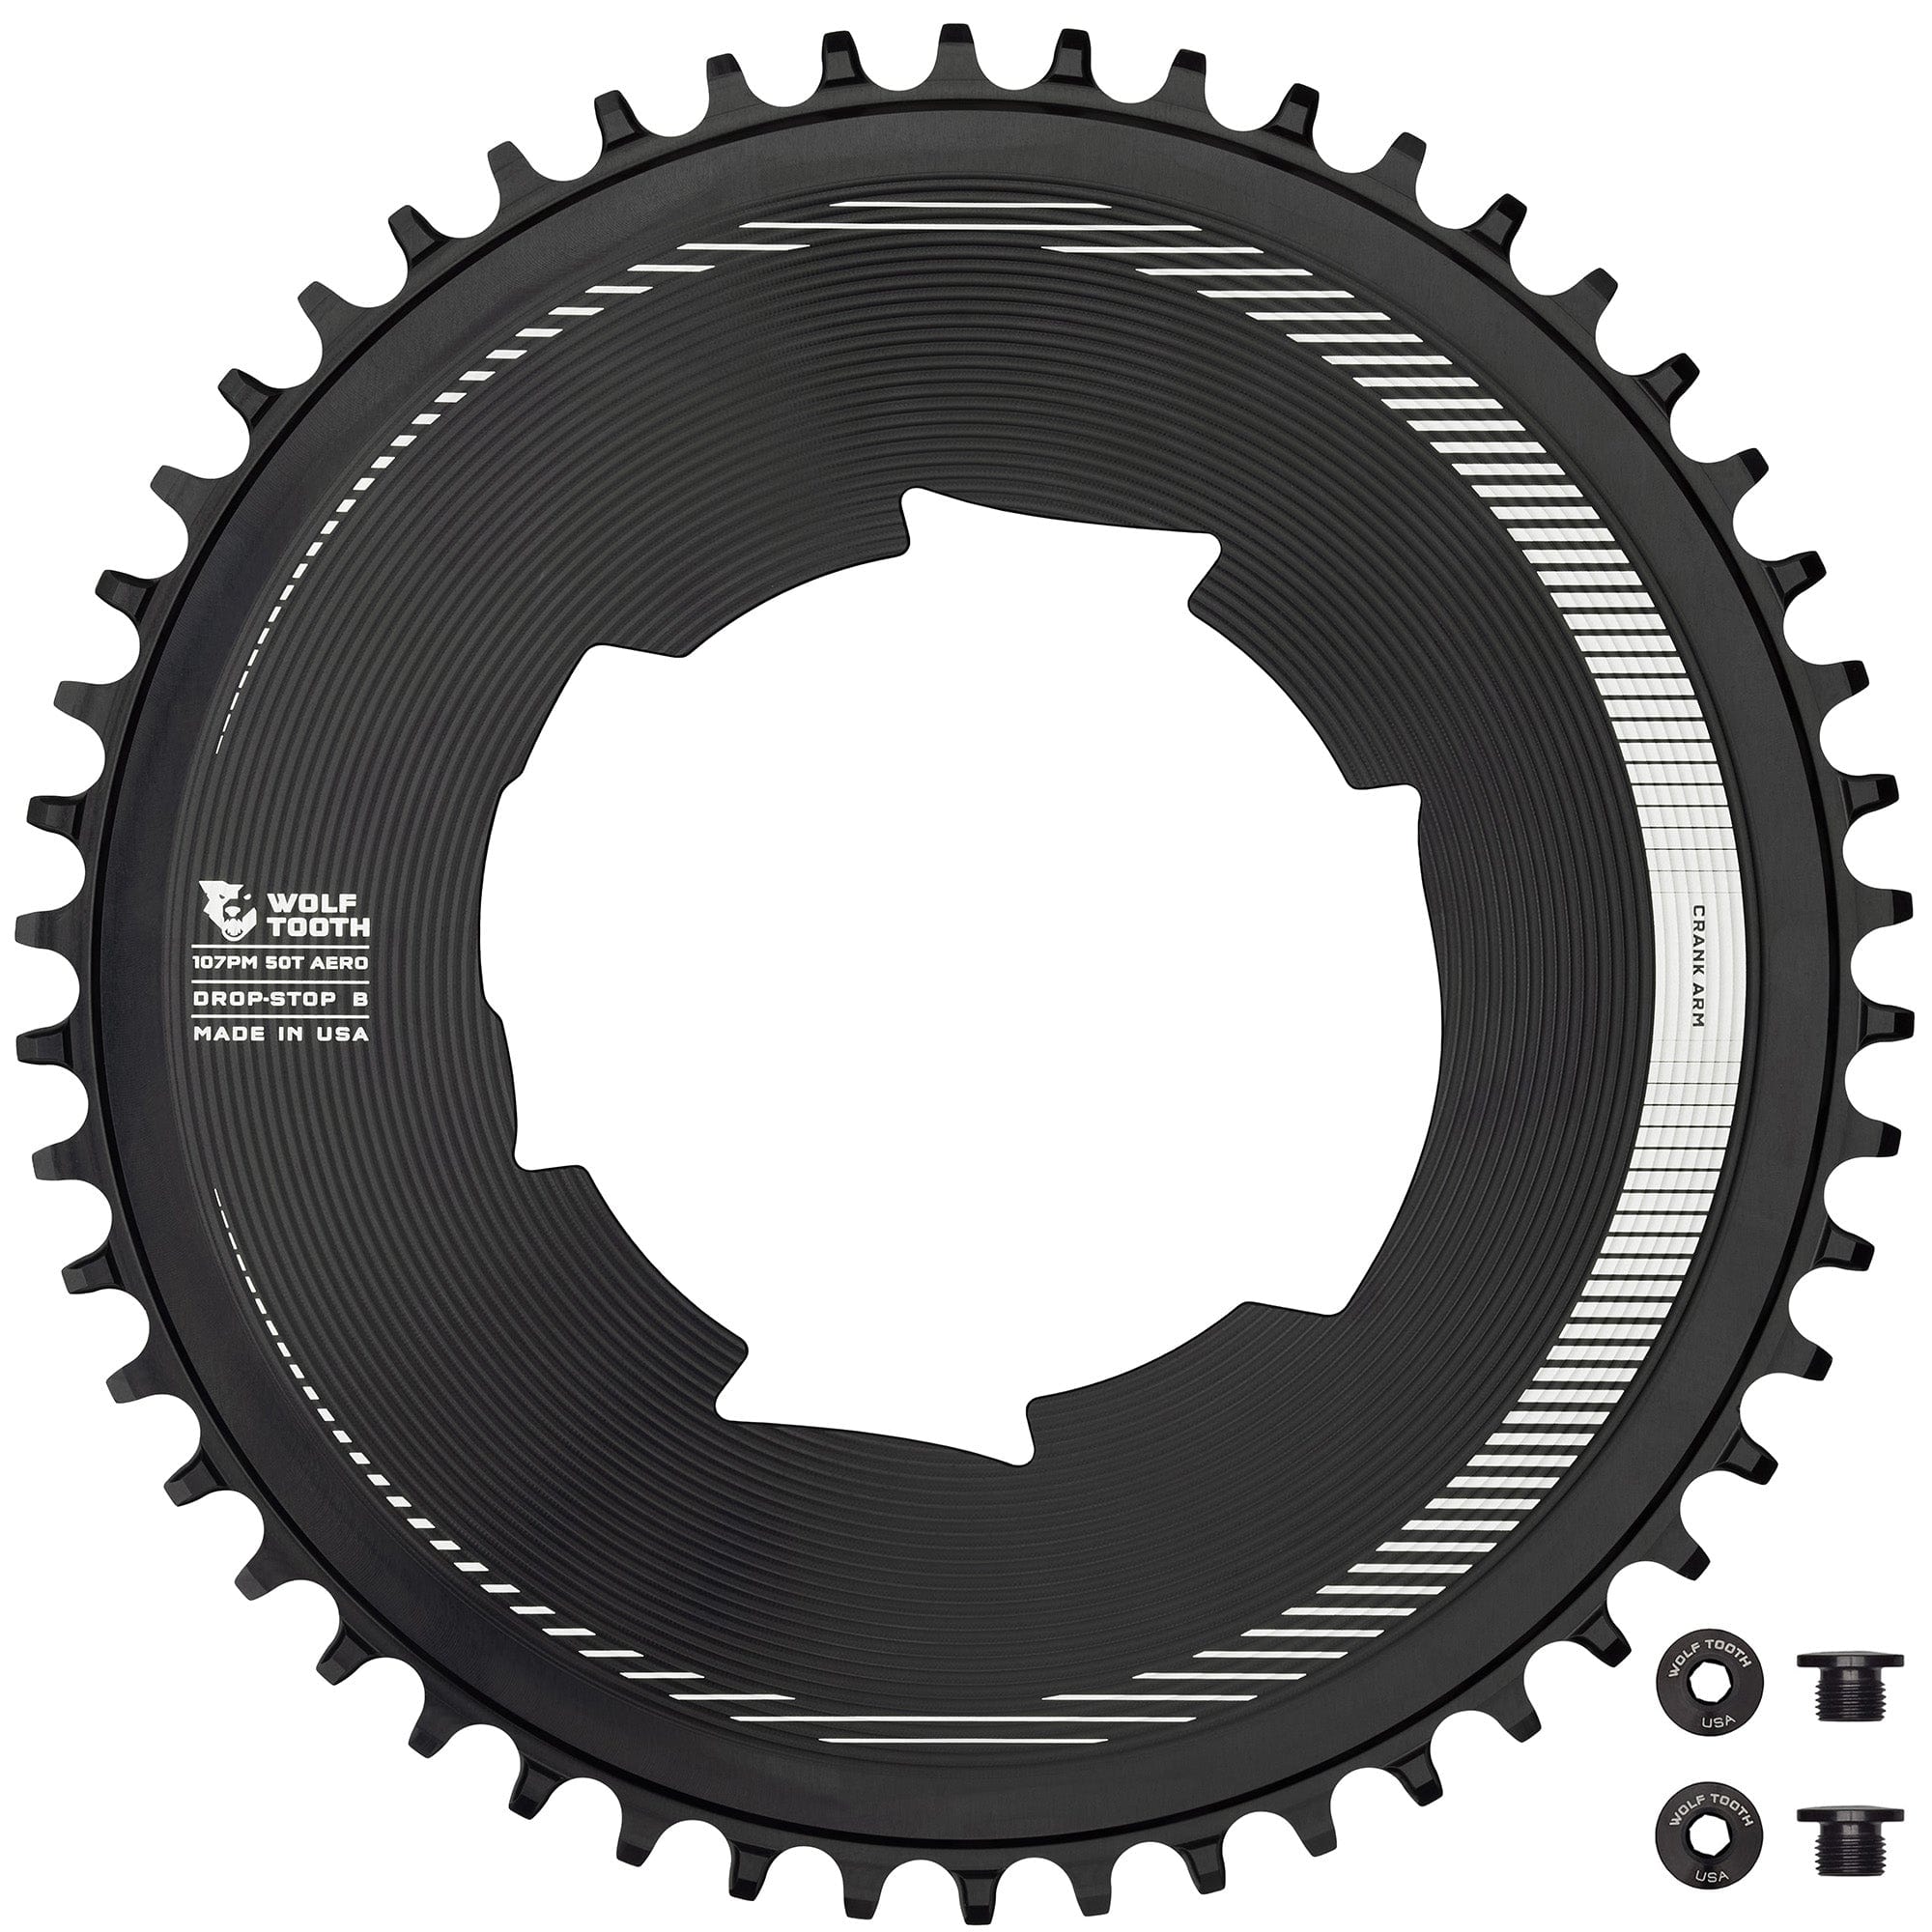 Drop-Stop B / 50T Aero 107 BCD Chainrings for SRAM